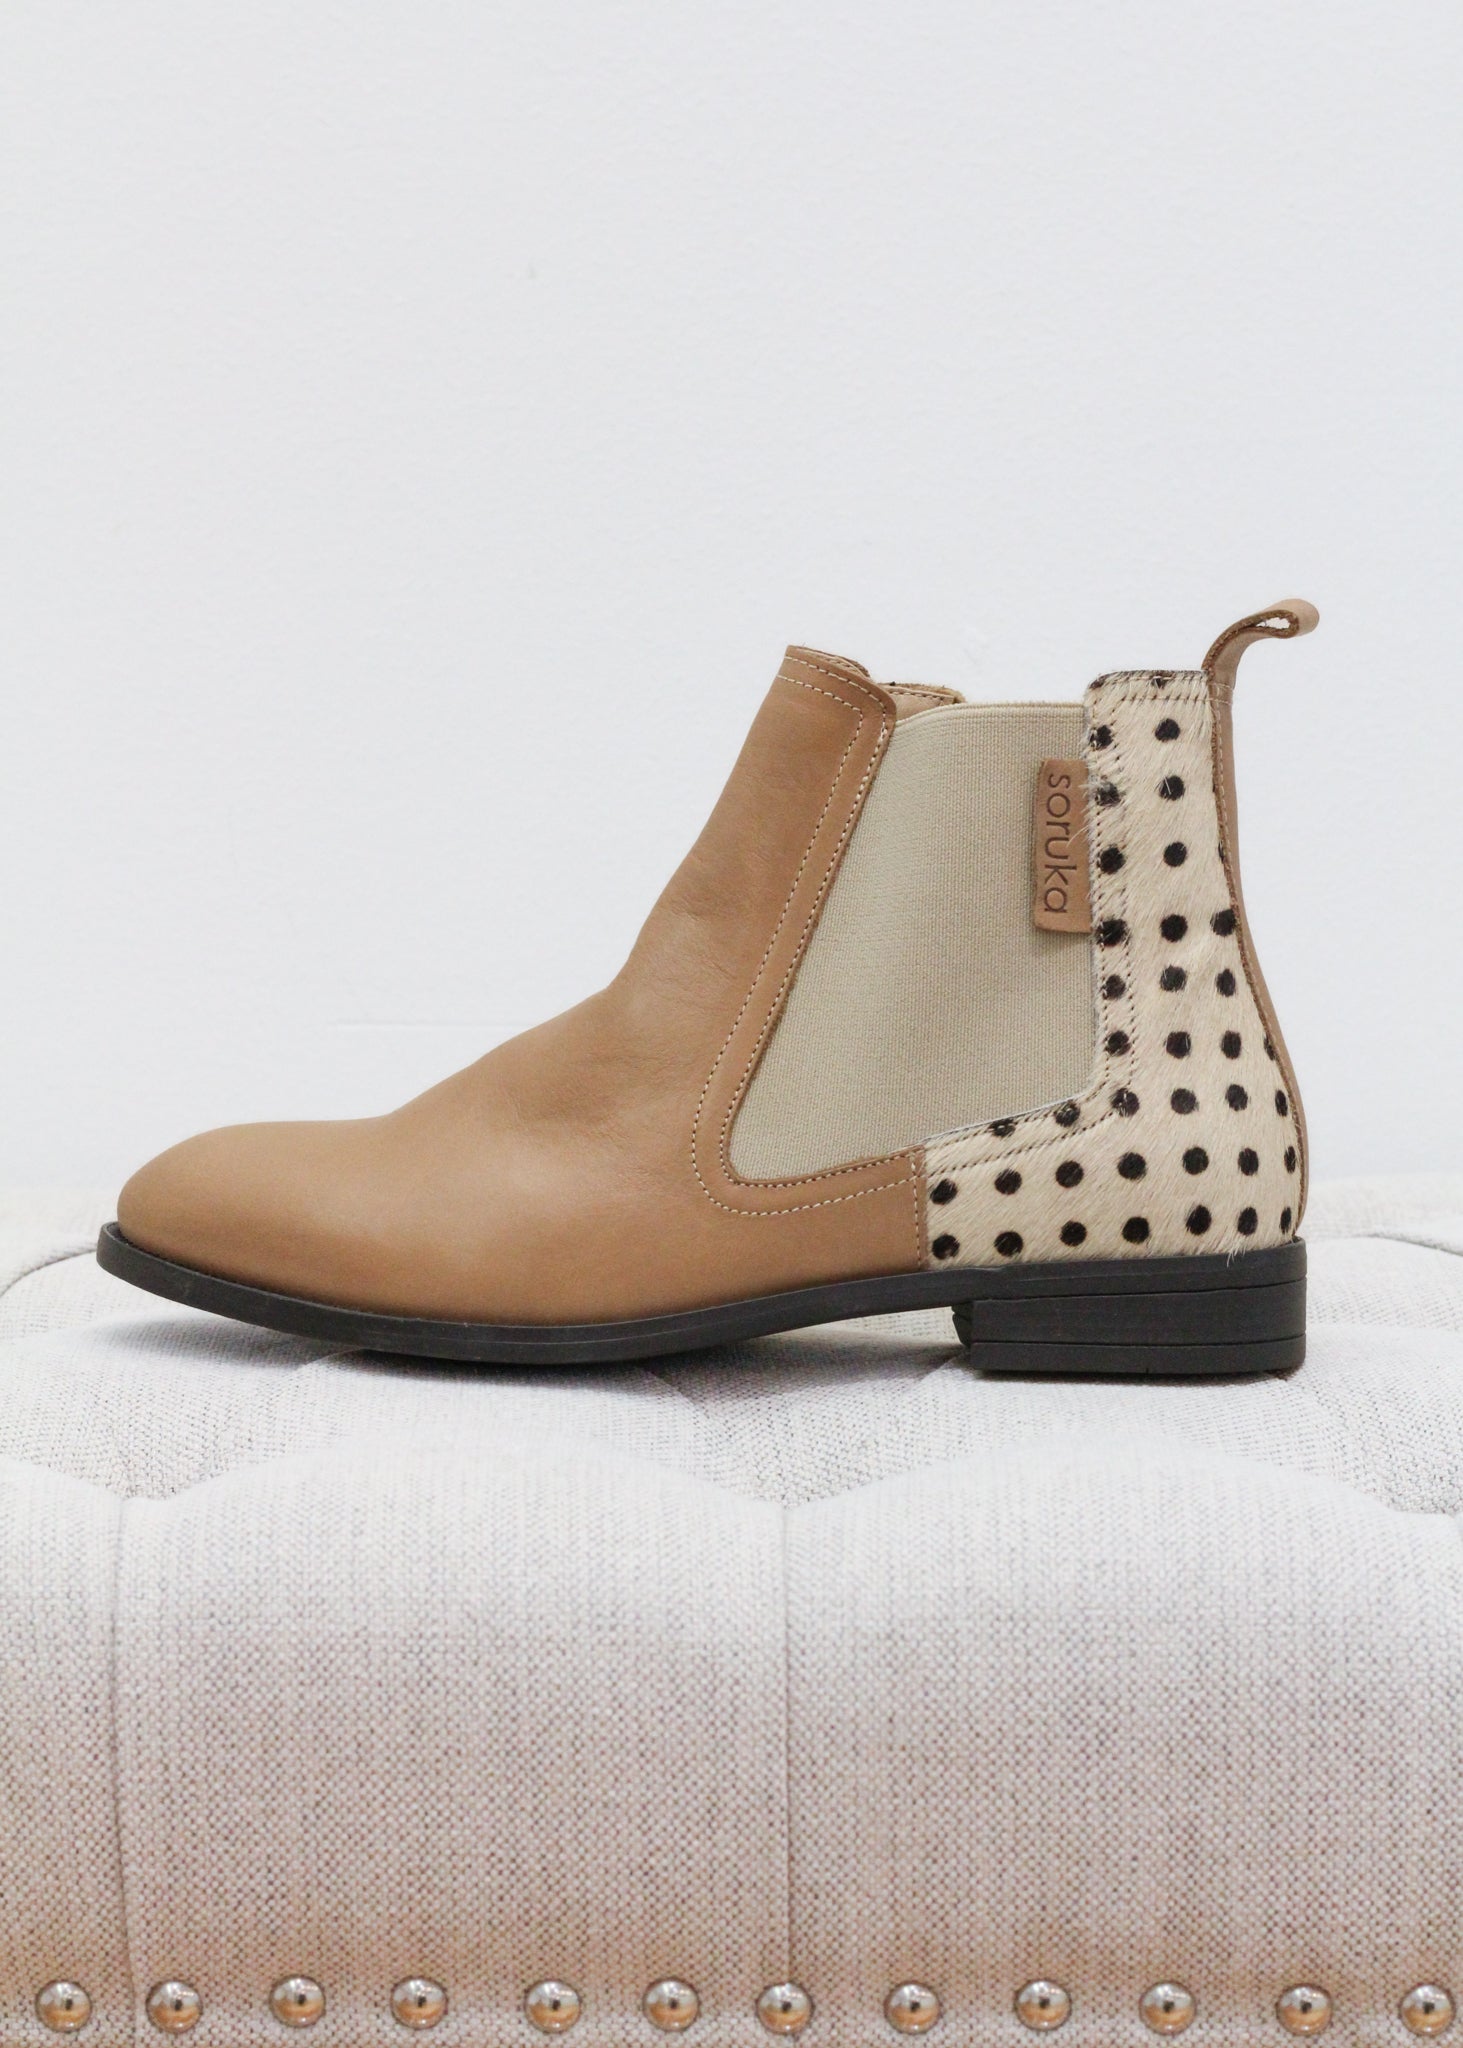 Soruka Vesta Ankle Boots in light brown color. Available online and in store at Kadou Boutique.